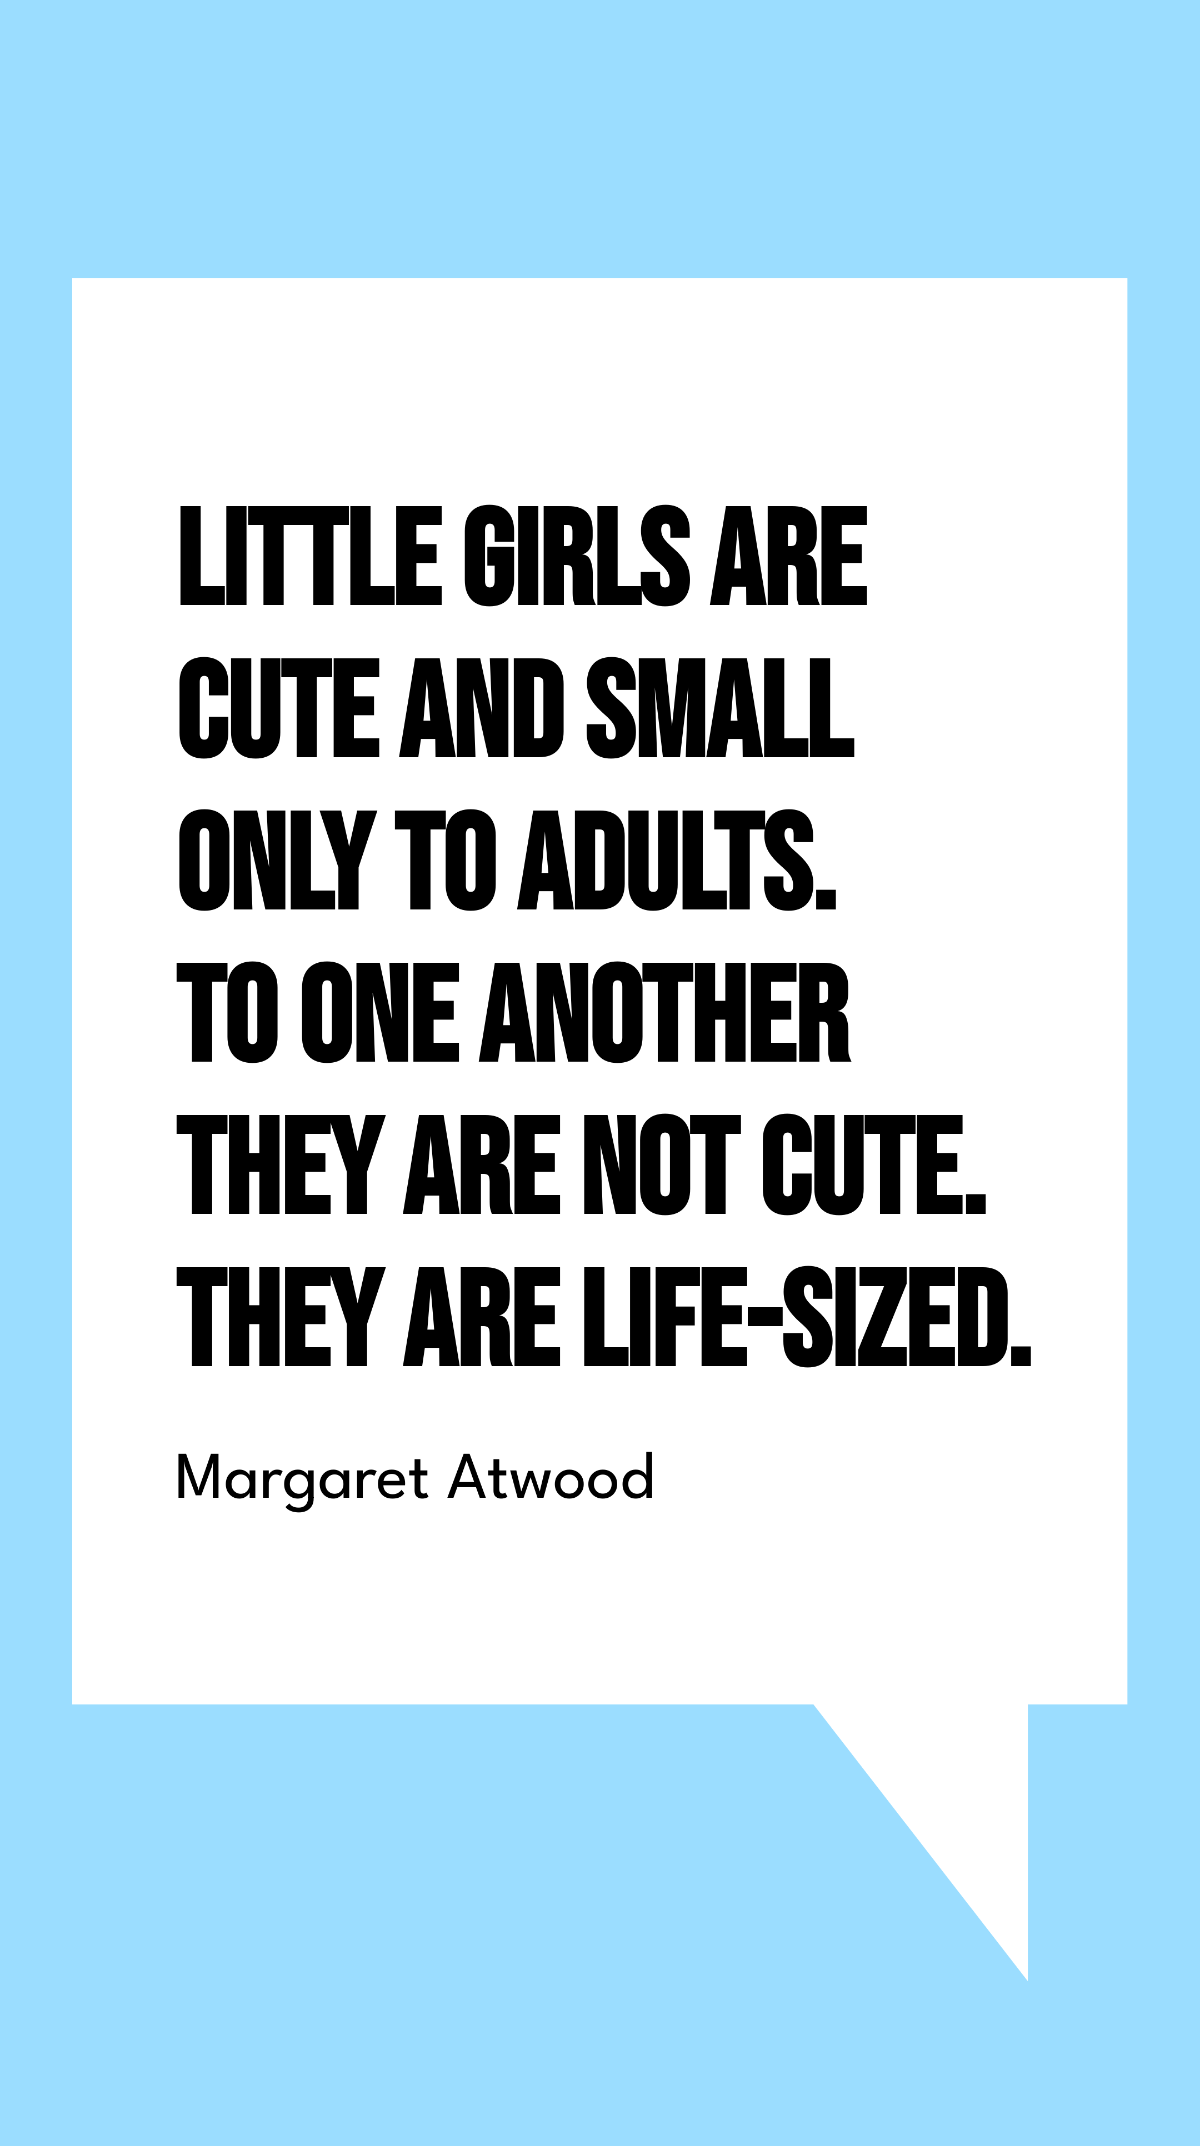 Free Margaret Atwood - Little girls are cute and small only to adults. To one another they are not cute. They are life-sized. Template